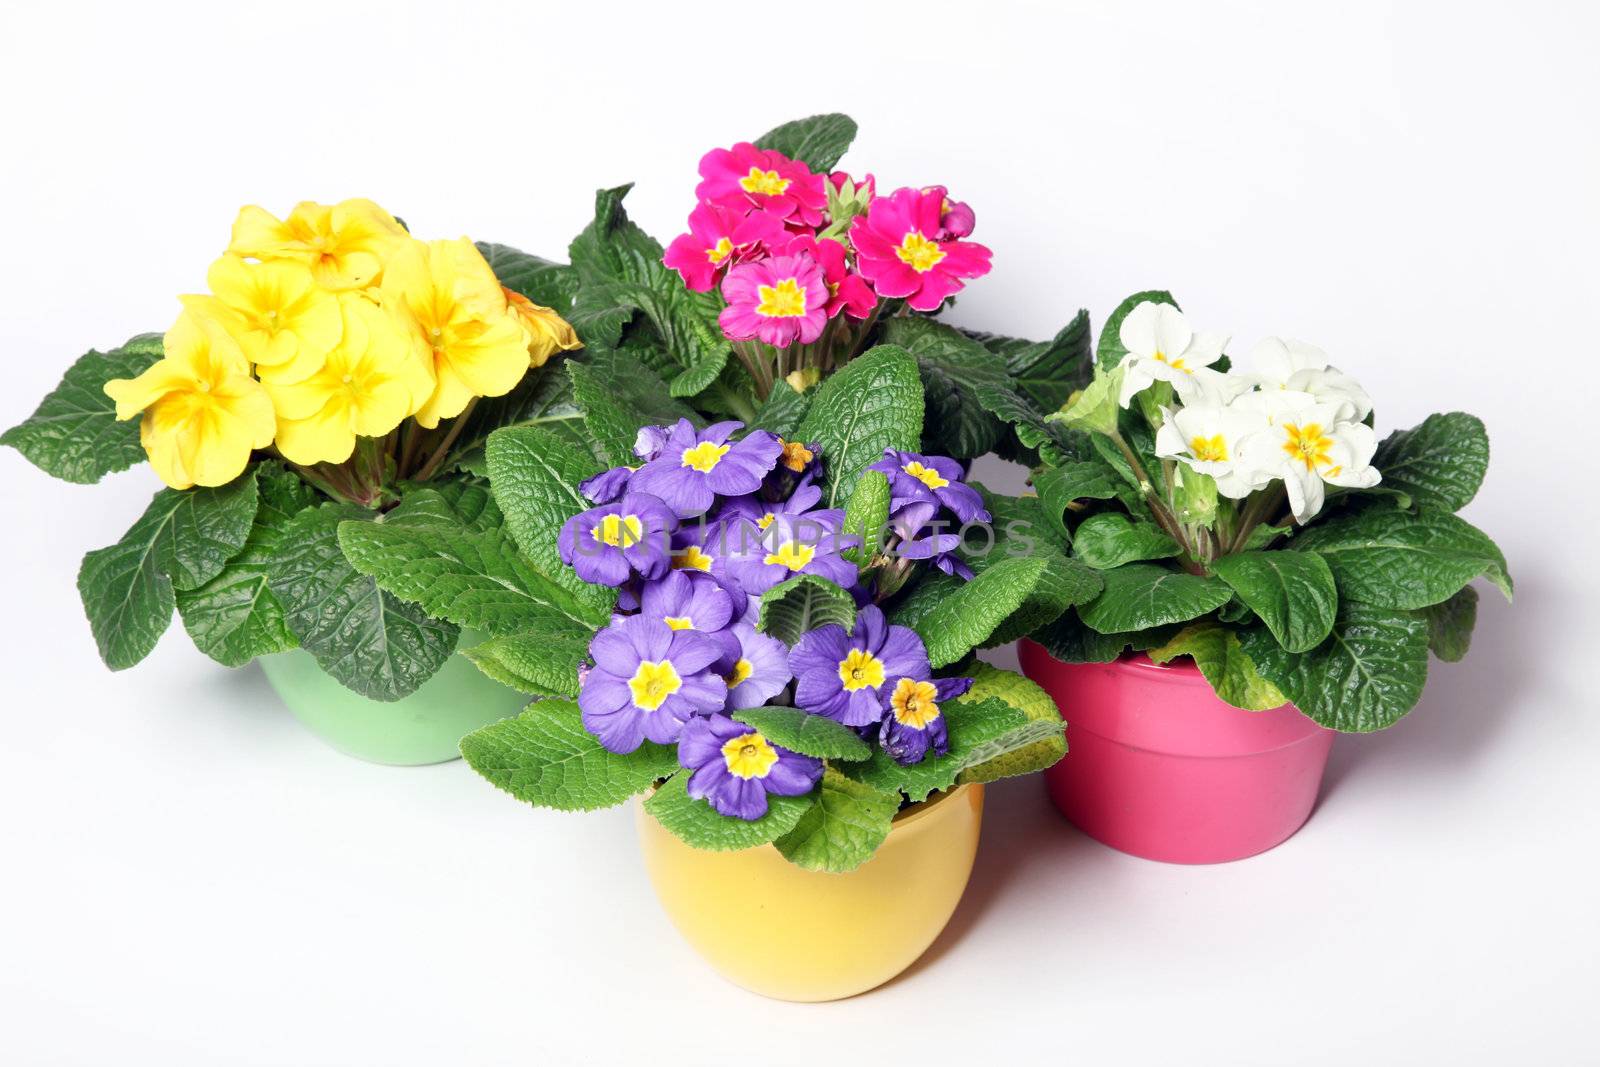 Primroses in colorful pots on a white background